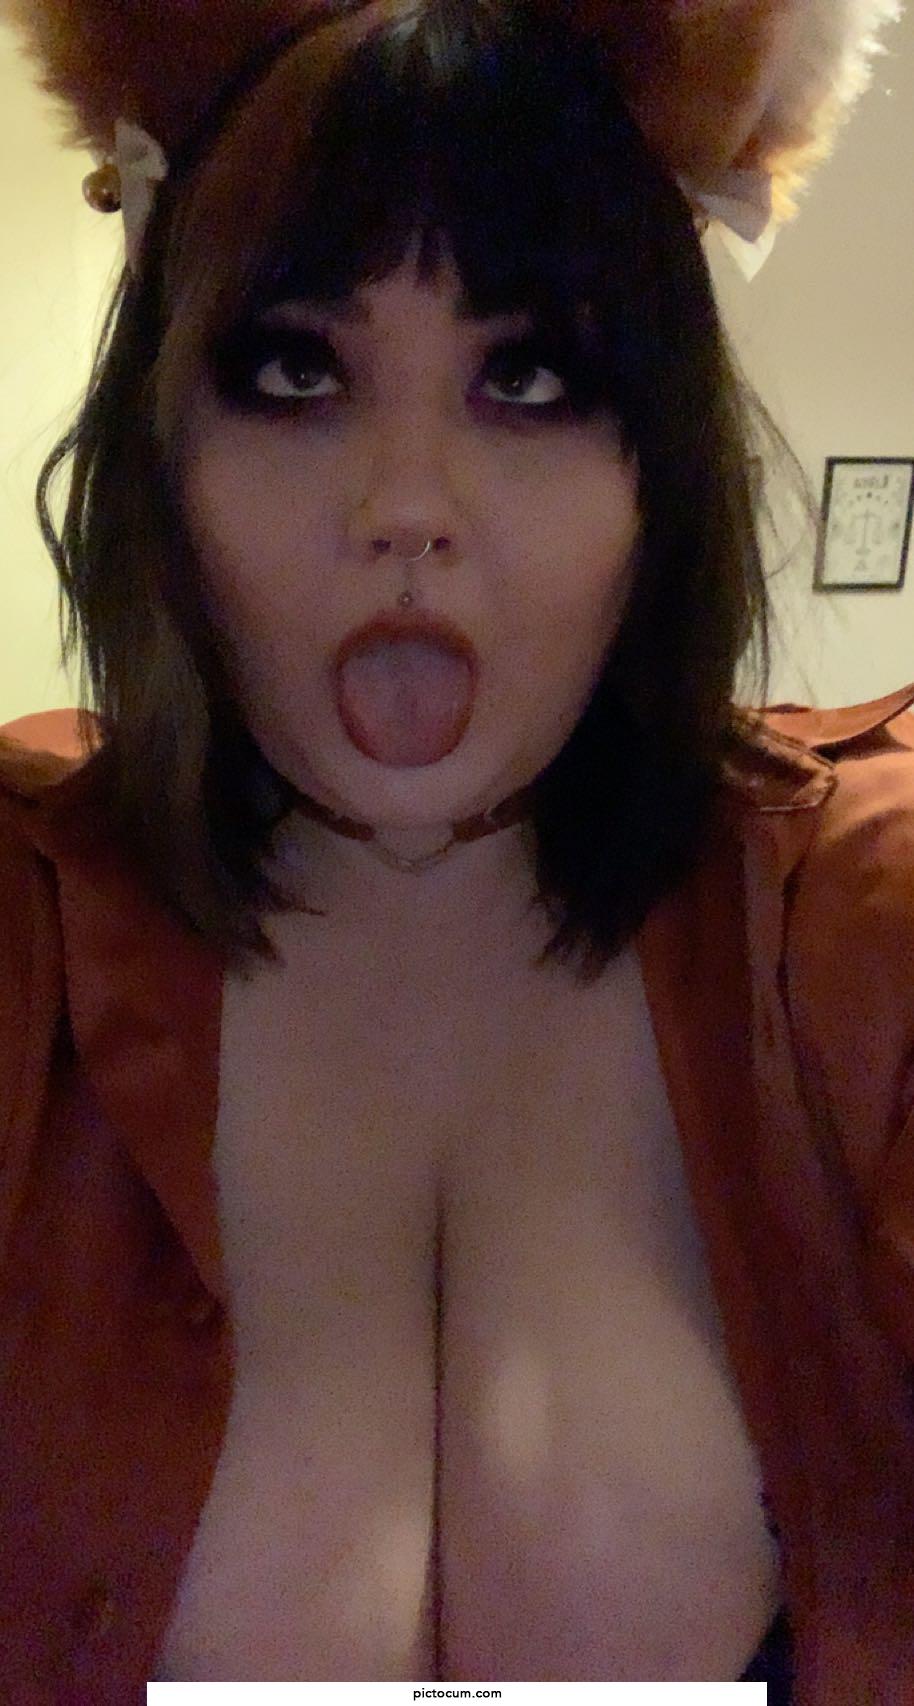 Just a little ahegao 😇